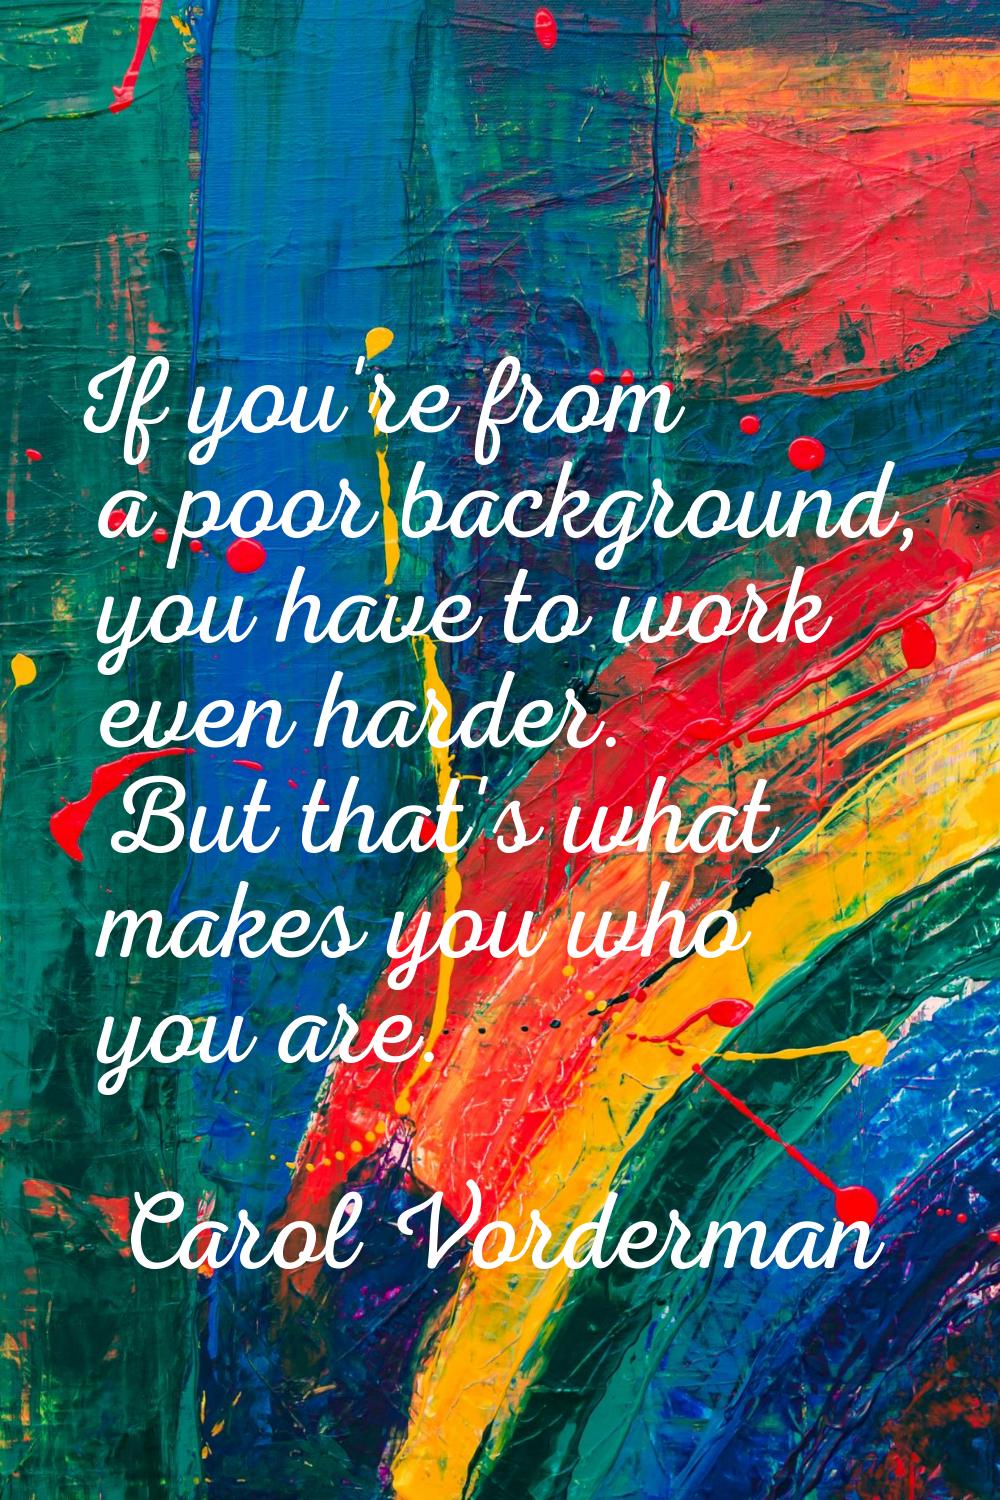 If you're from a poor background, you have to work even harder. But that's what makes you who you a